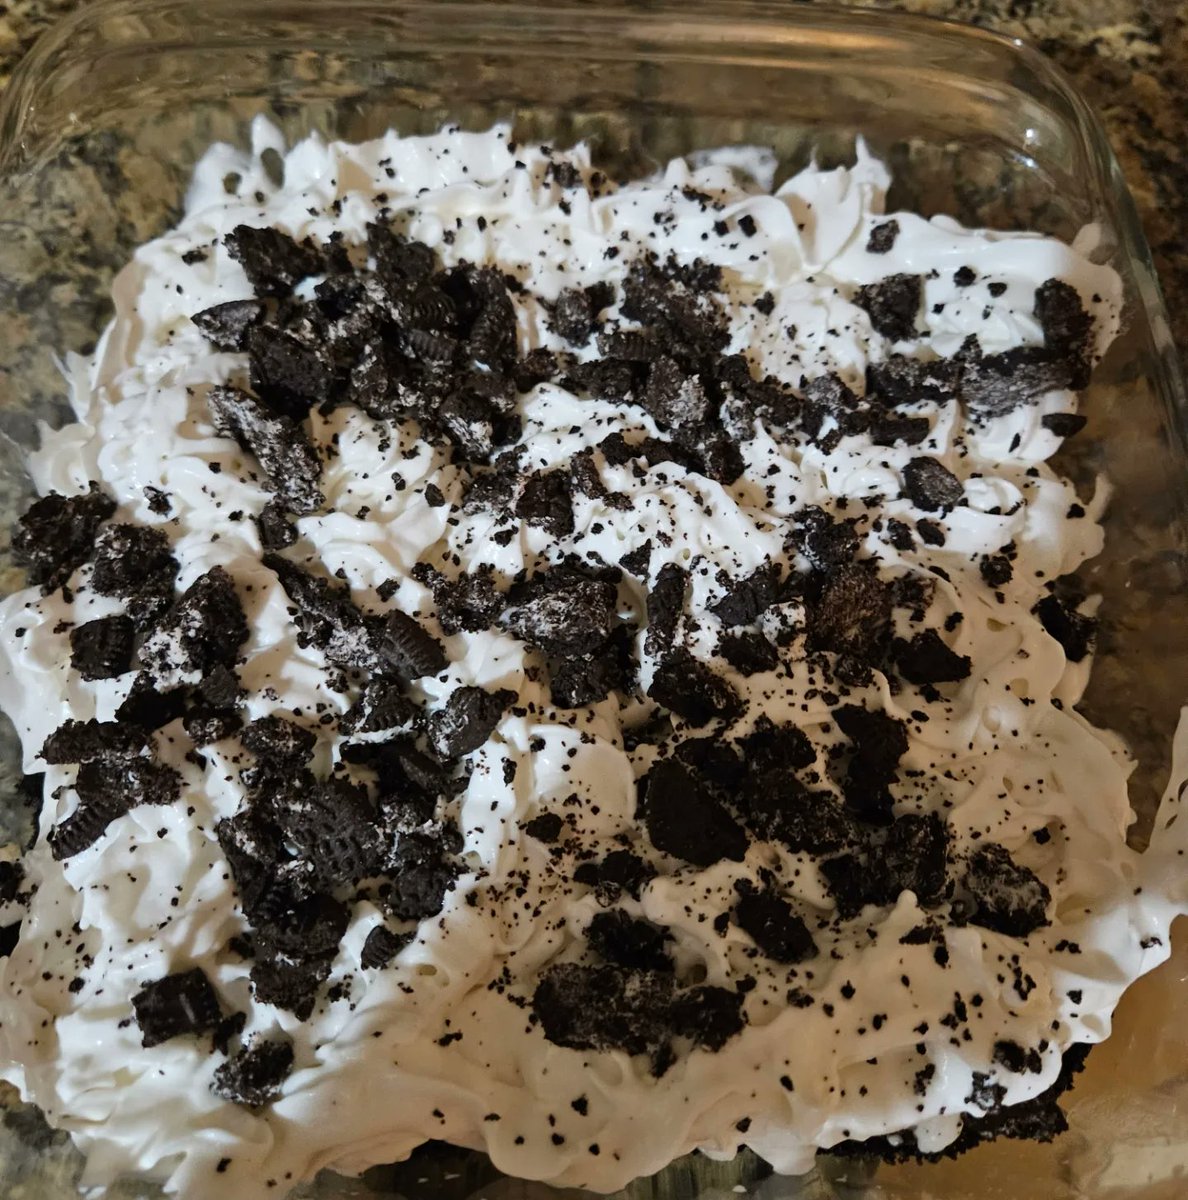 I made this #NoBake #Oreo #Pie, which is #glutenfree, #dairyfree, #vegan and #nutfree. I wanted to make it more #lowcarb, but the store was out of the Catalina Crunch cookies, so I had to use GF Oreos. I did use #sugar-free #chocolatechips. I didn't have the DF #CocoWhip, either,…